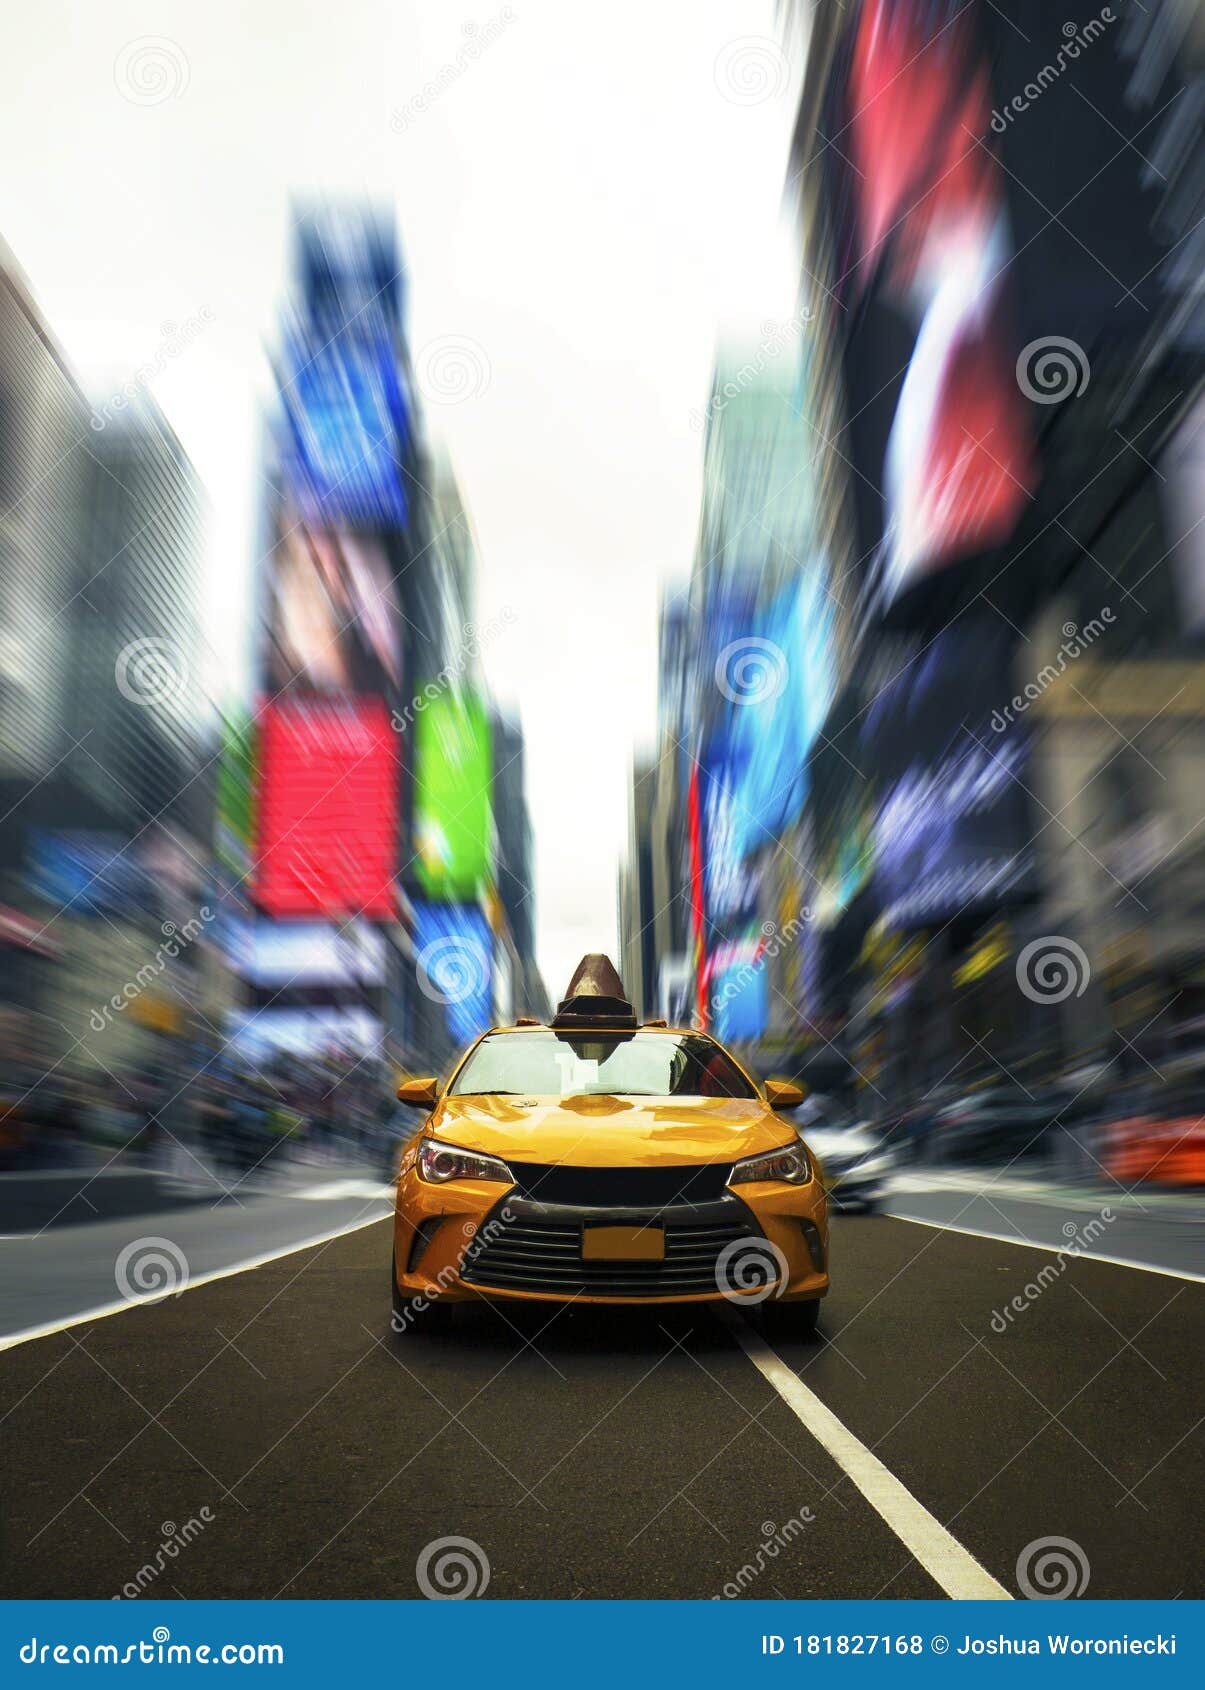 iconic new york taxi in times square with dramatic modern motion effect